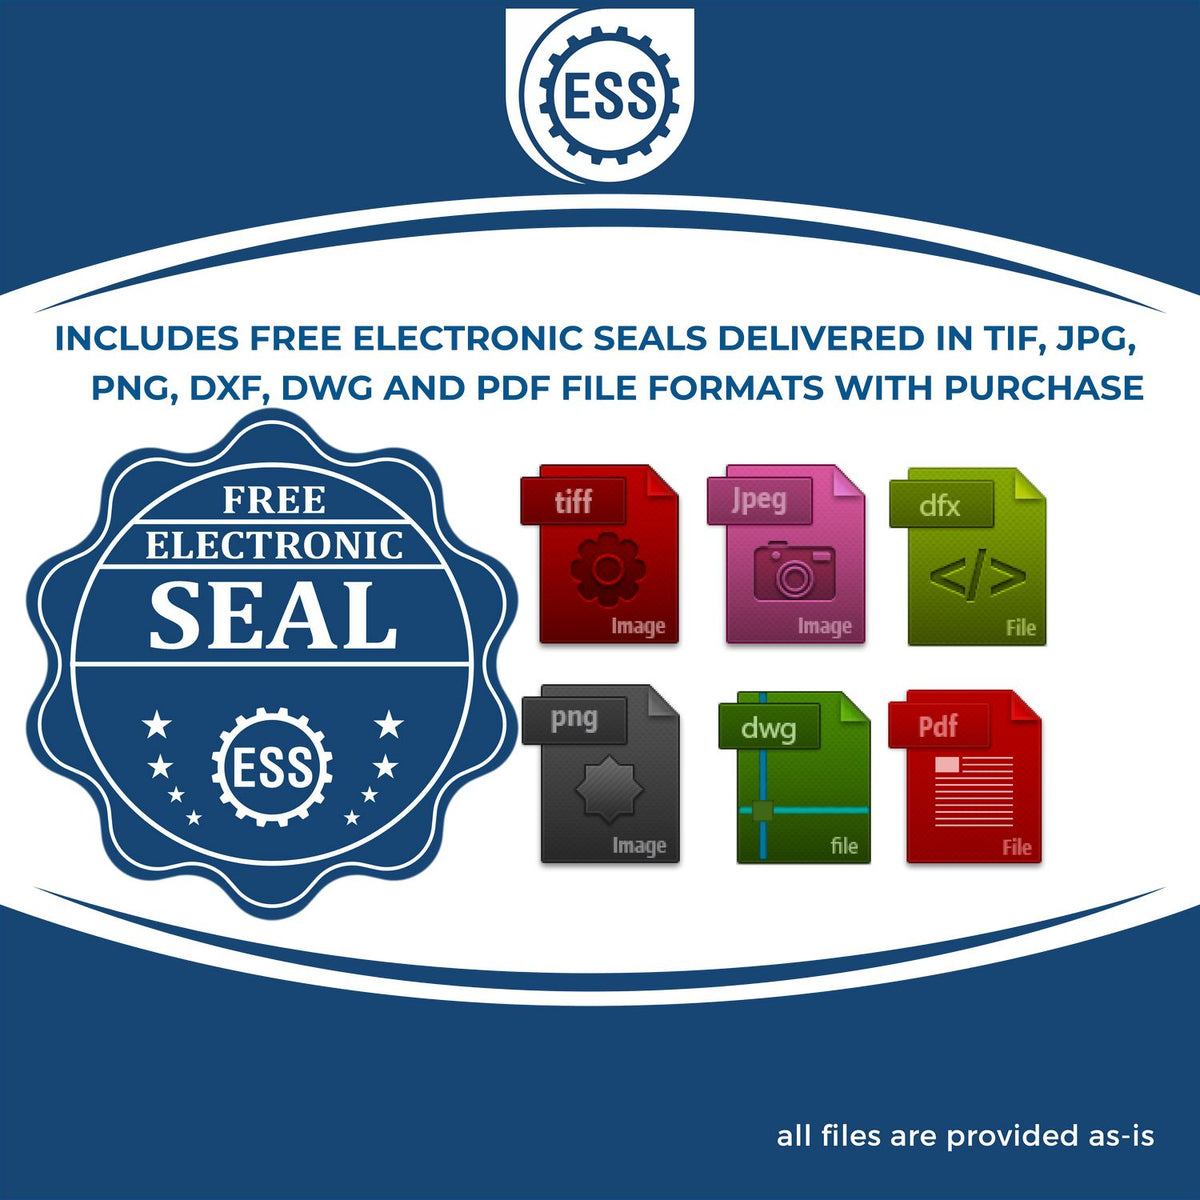 An infographic for the free electronic seal for the Pennsylvania Professional Geologist Seal Stamp illustrating the different file type icons such as DXF, DWG, TIF, JPG and PNG.